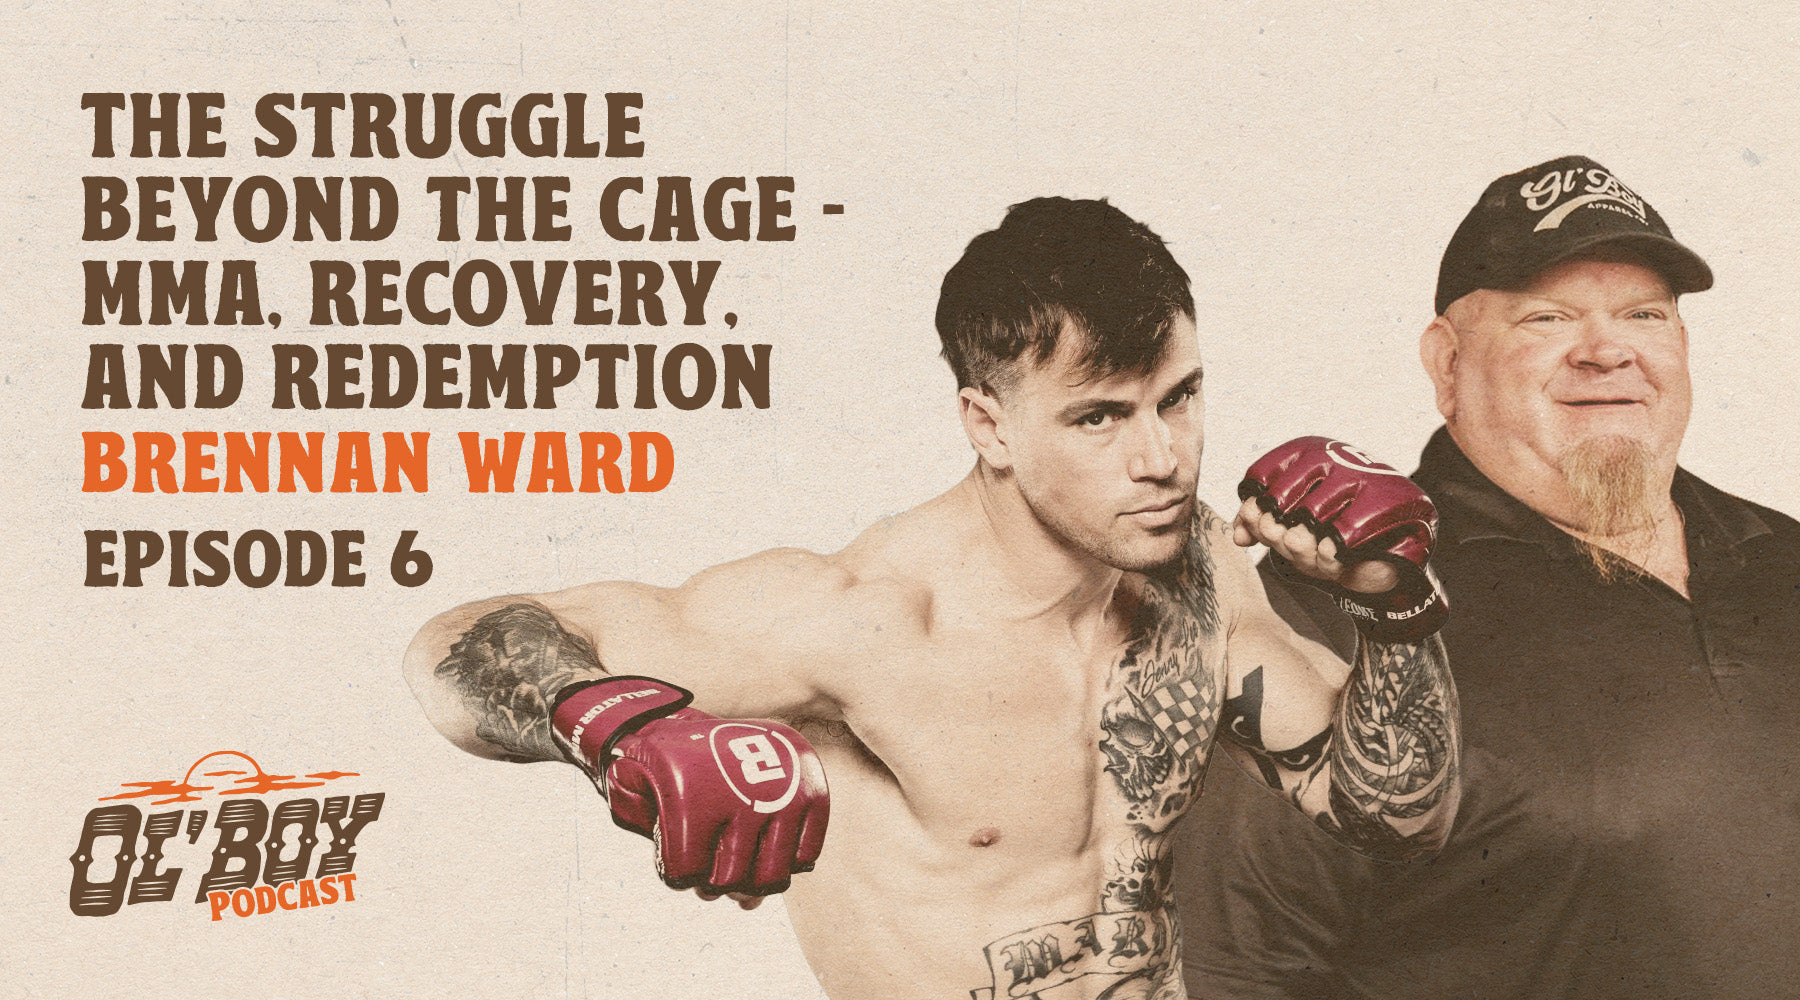 Episode 6 - Brennan Ward: The Struggle Beyond the Cage - MMA, Recovery, and Redemption